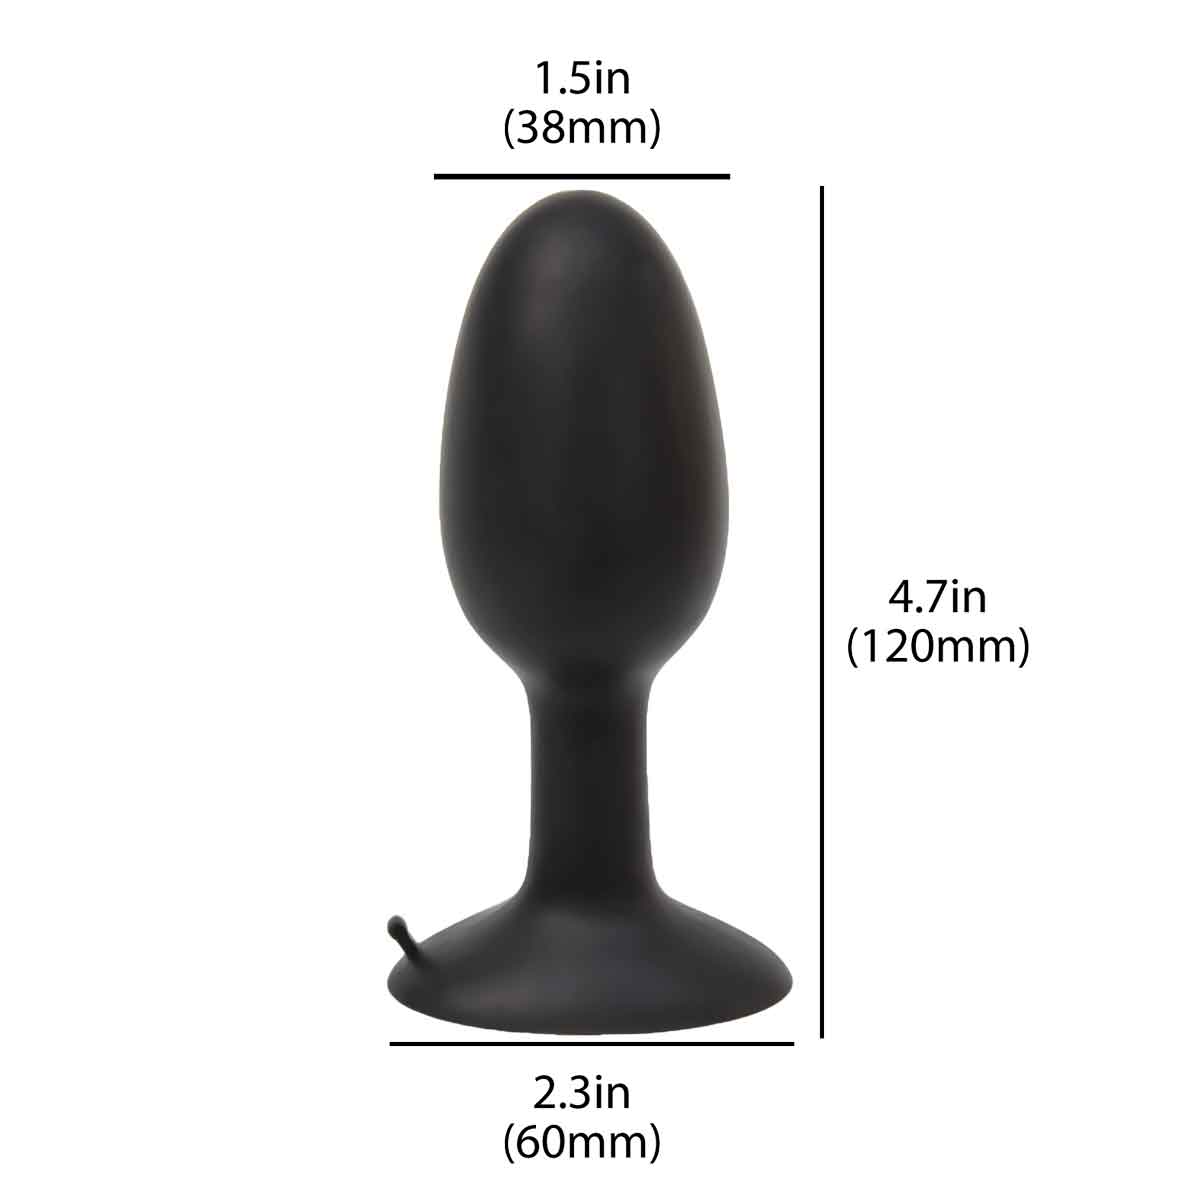 Seven Creations Roll Play Silicone Unisex Anal Plug - Large